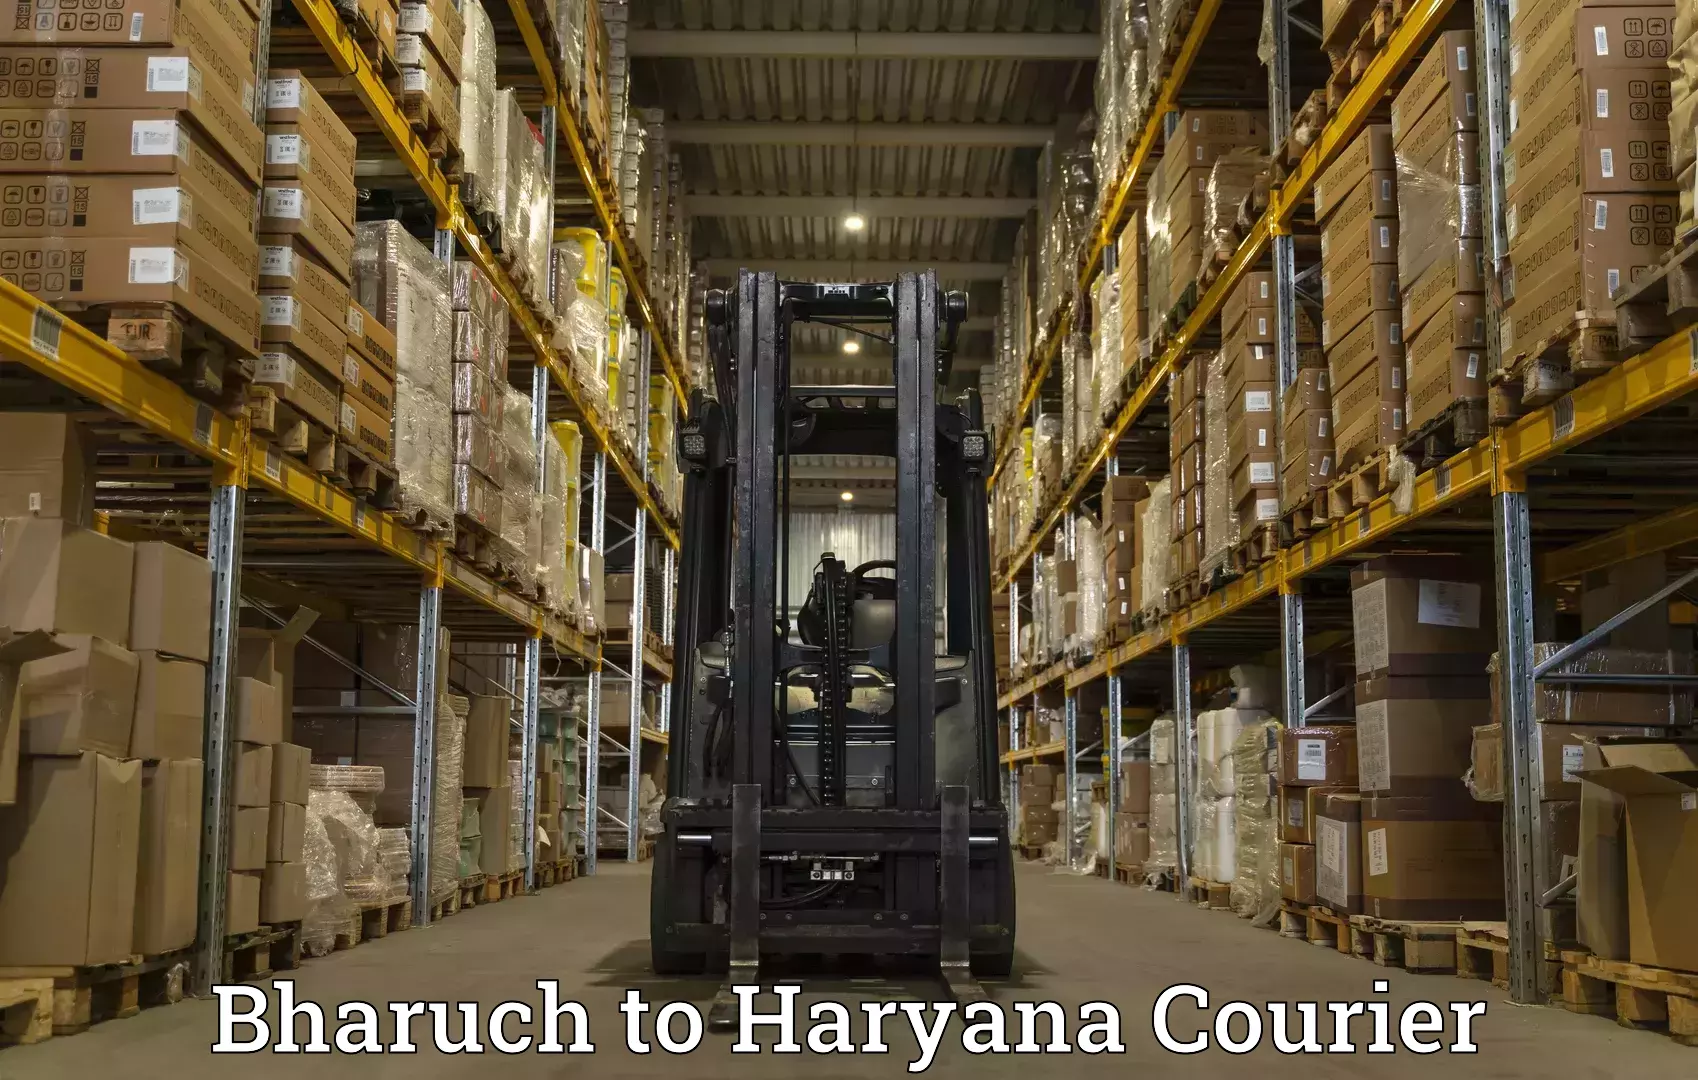 Cargo delivery service Bharuch to NCR Haryana